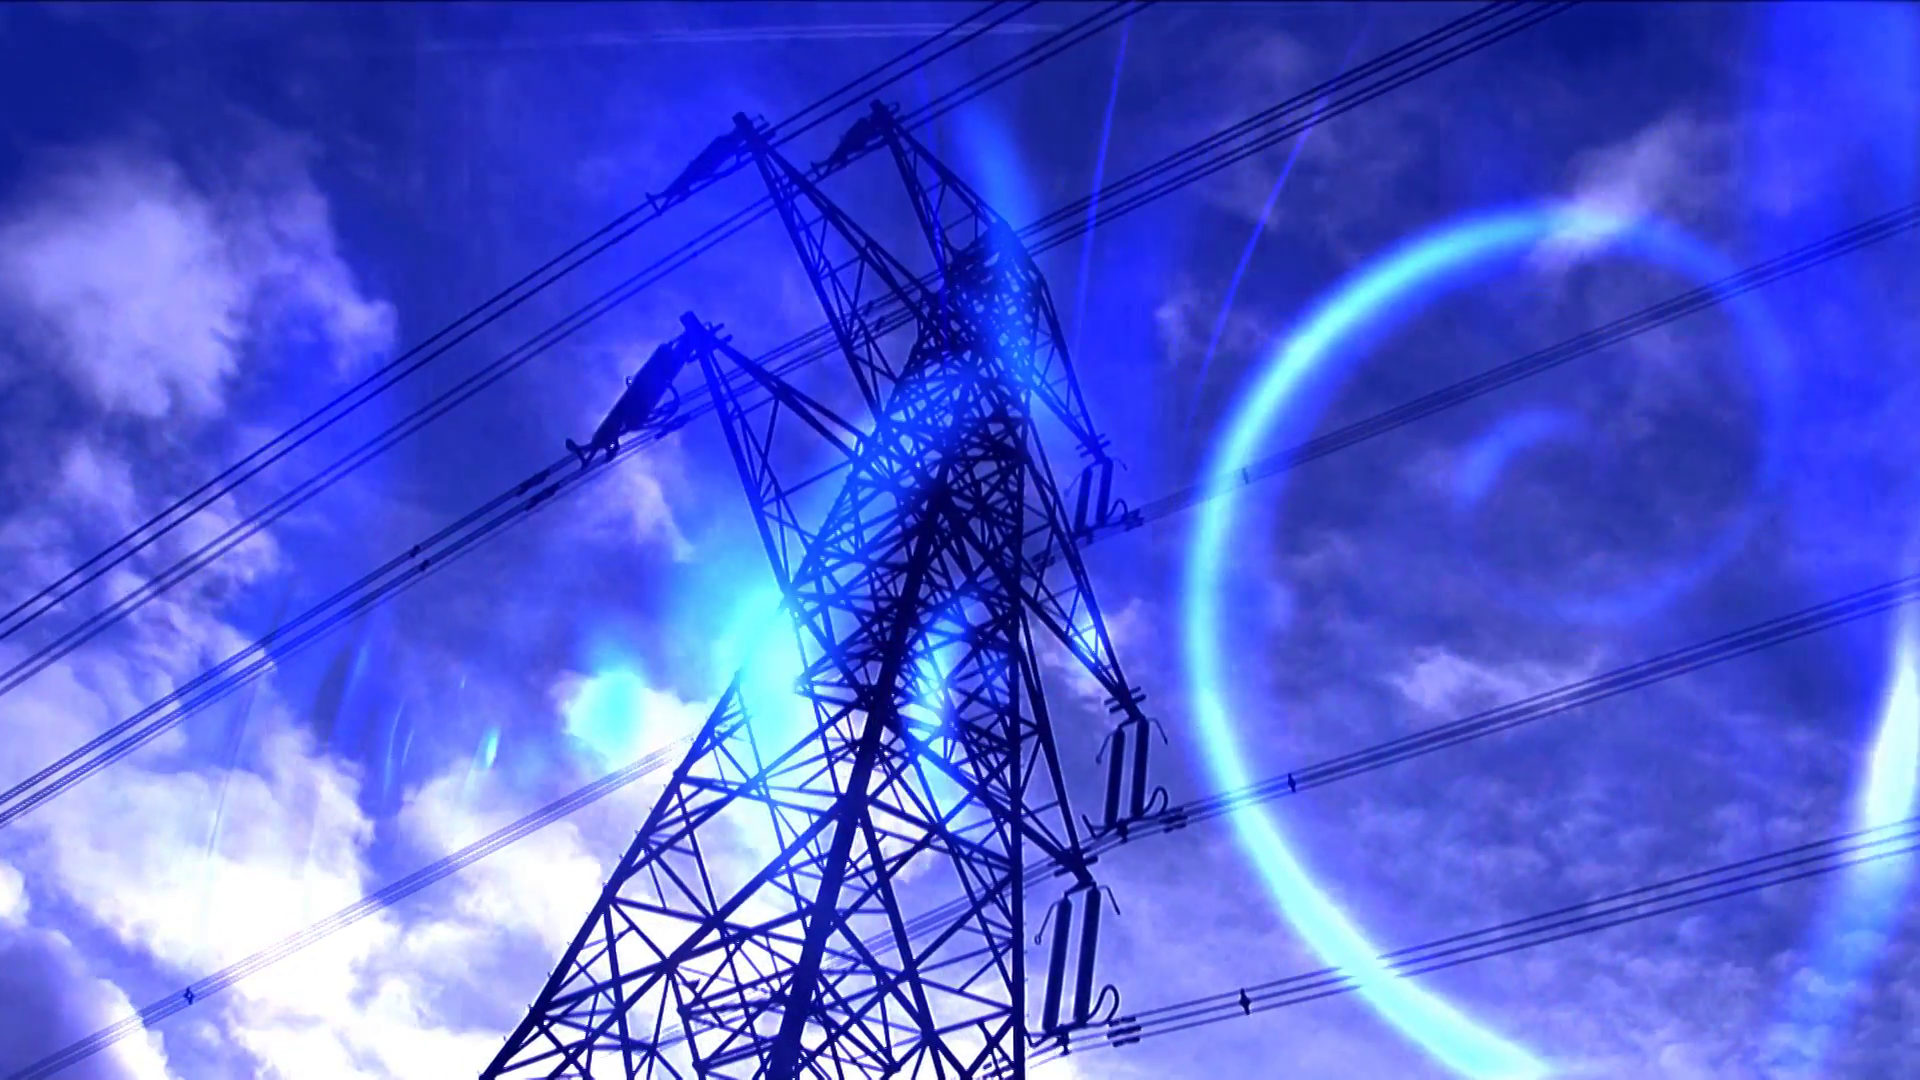 Time-lapse white clouds in blue sky behind electricity pylon with ...